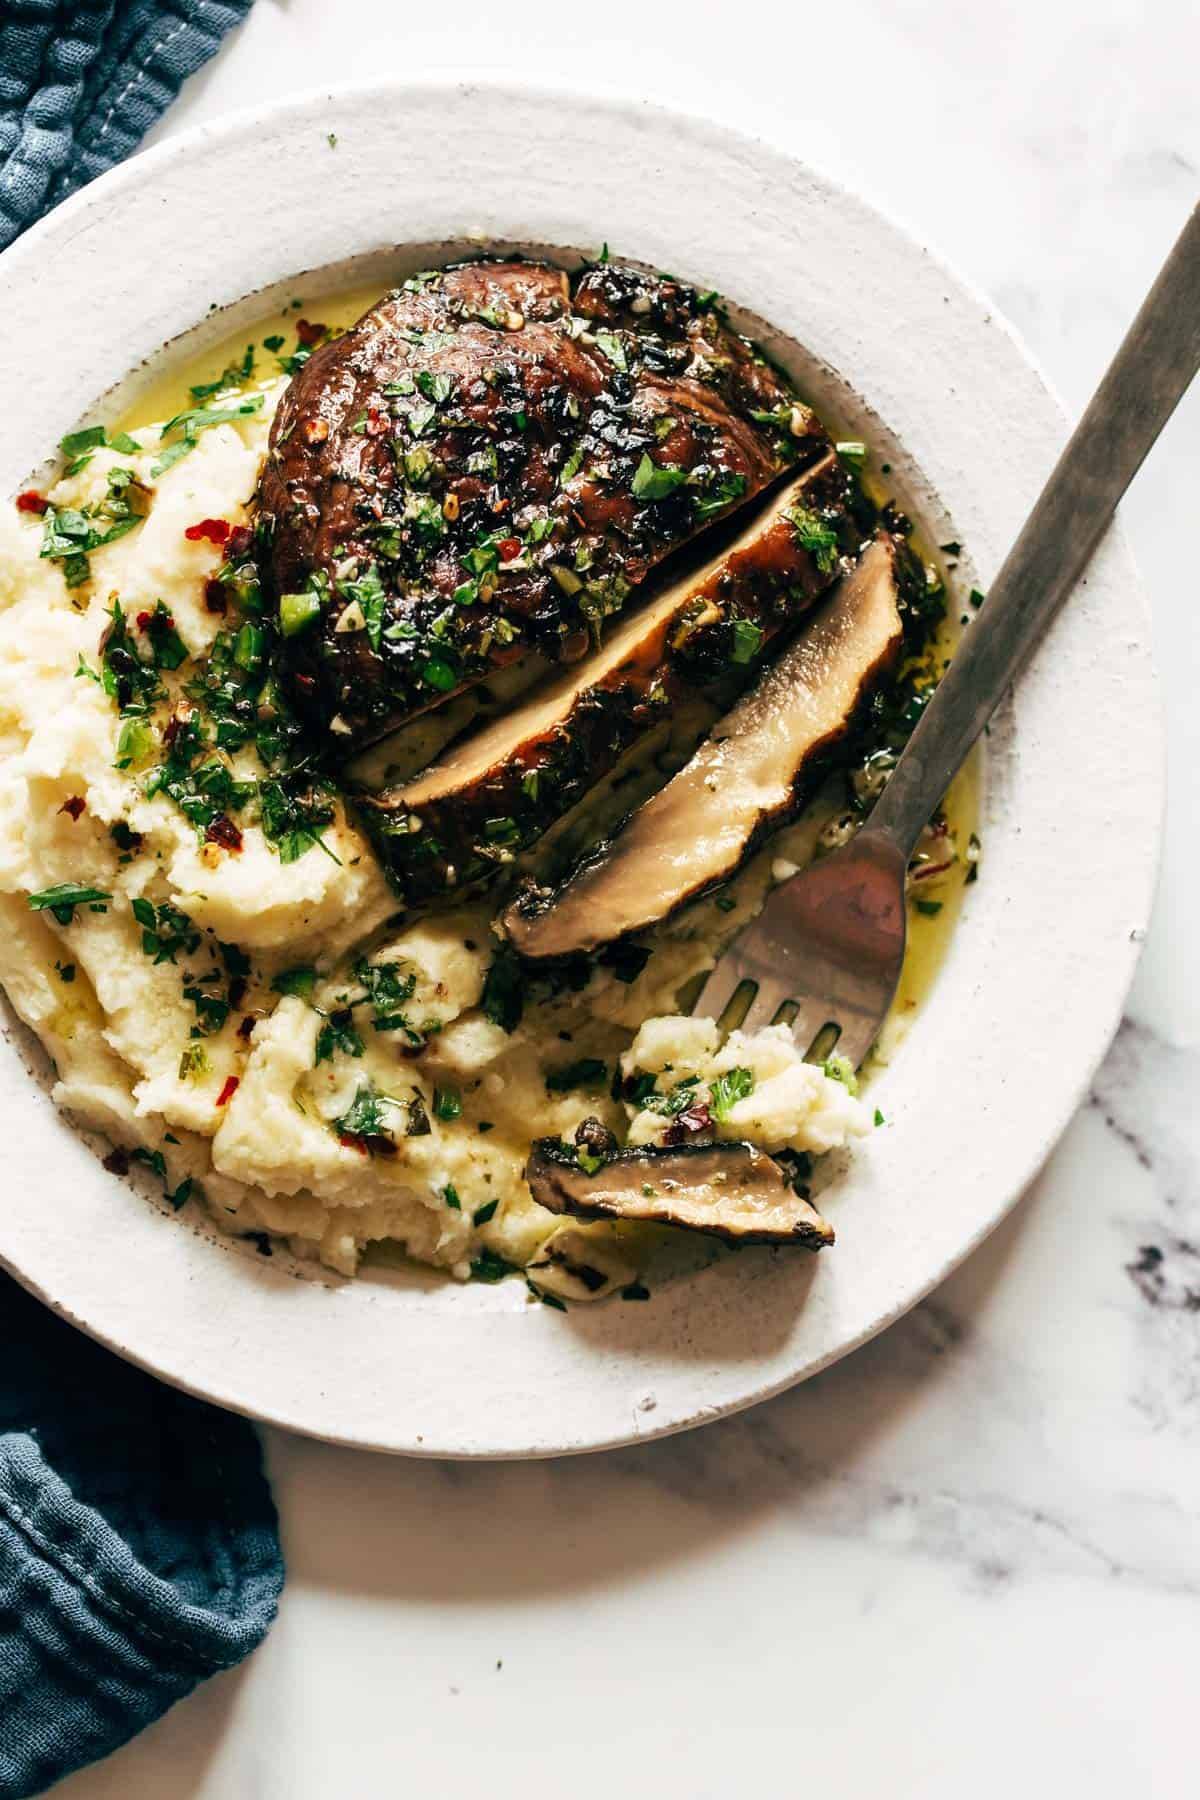 Grilled portobello sliced on top of goat cheese mashed potatoes.